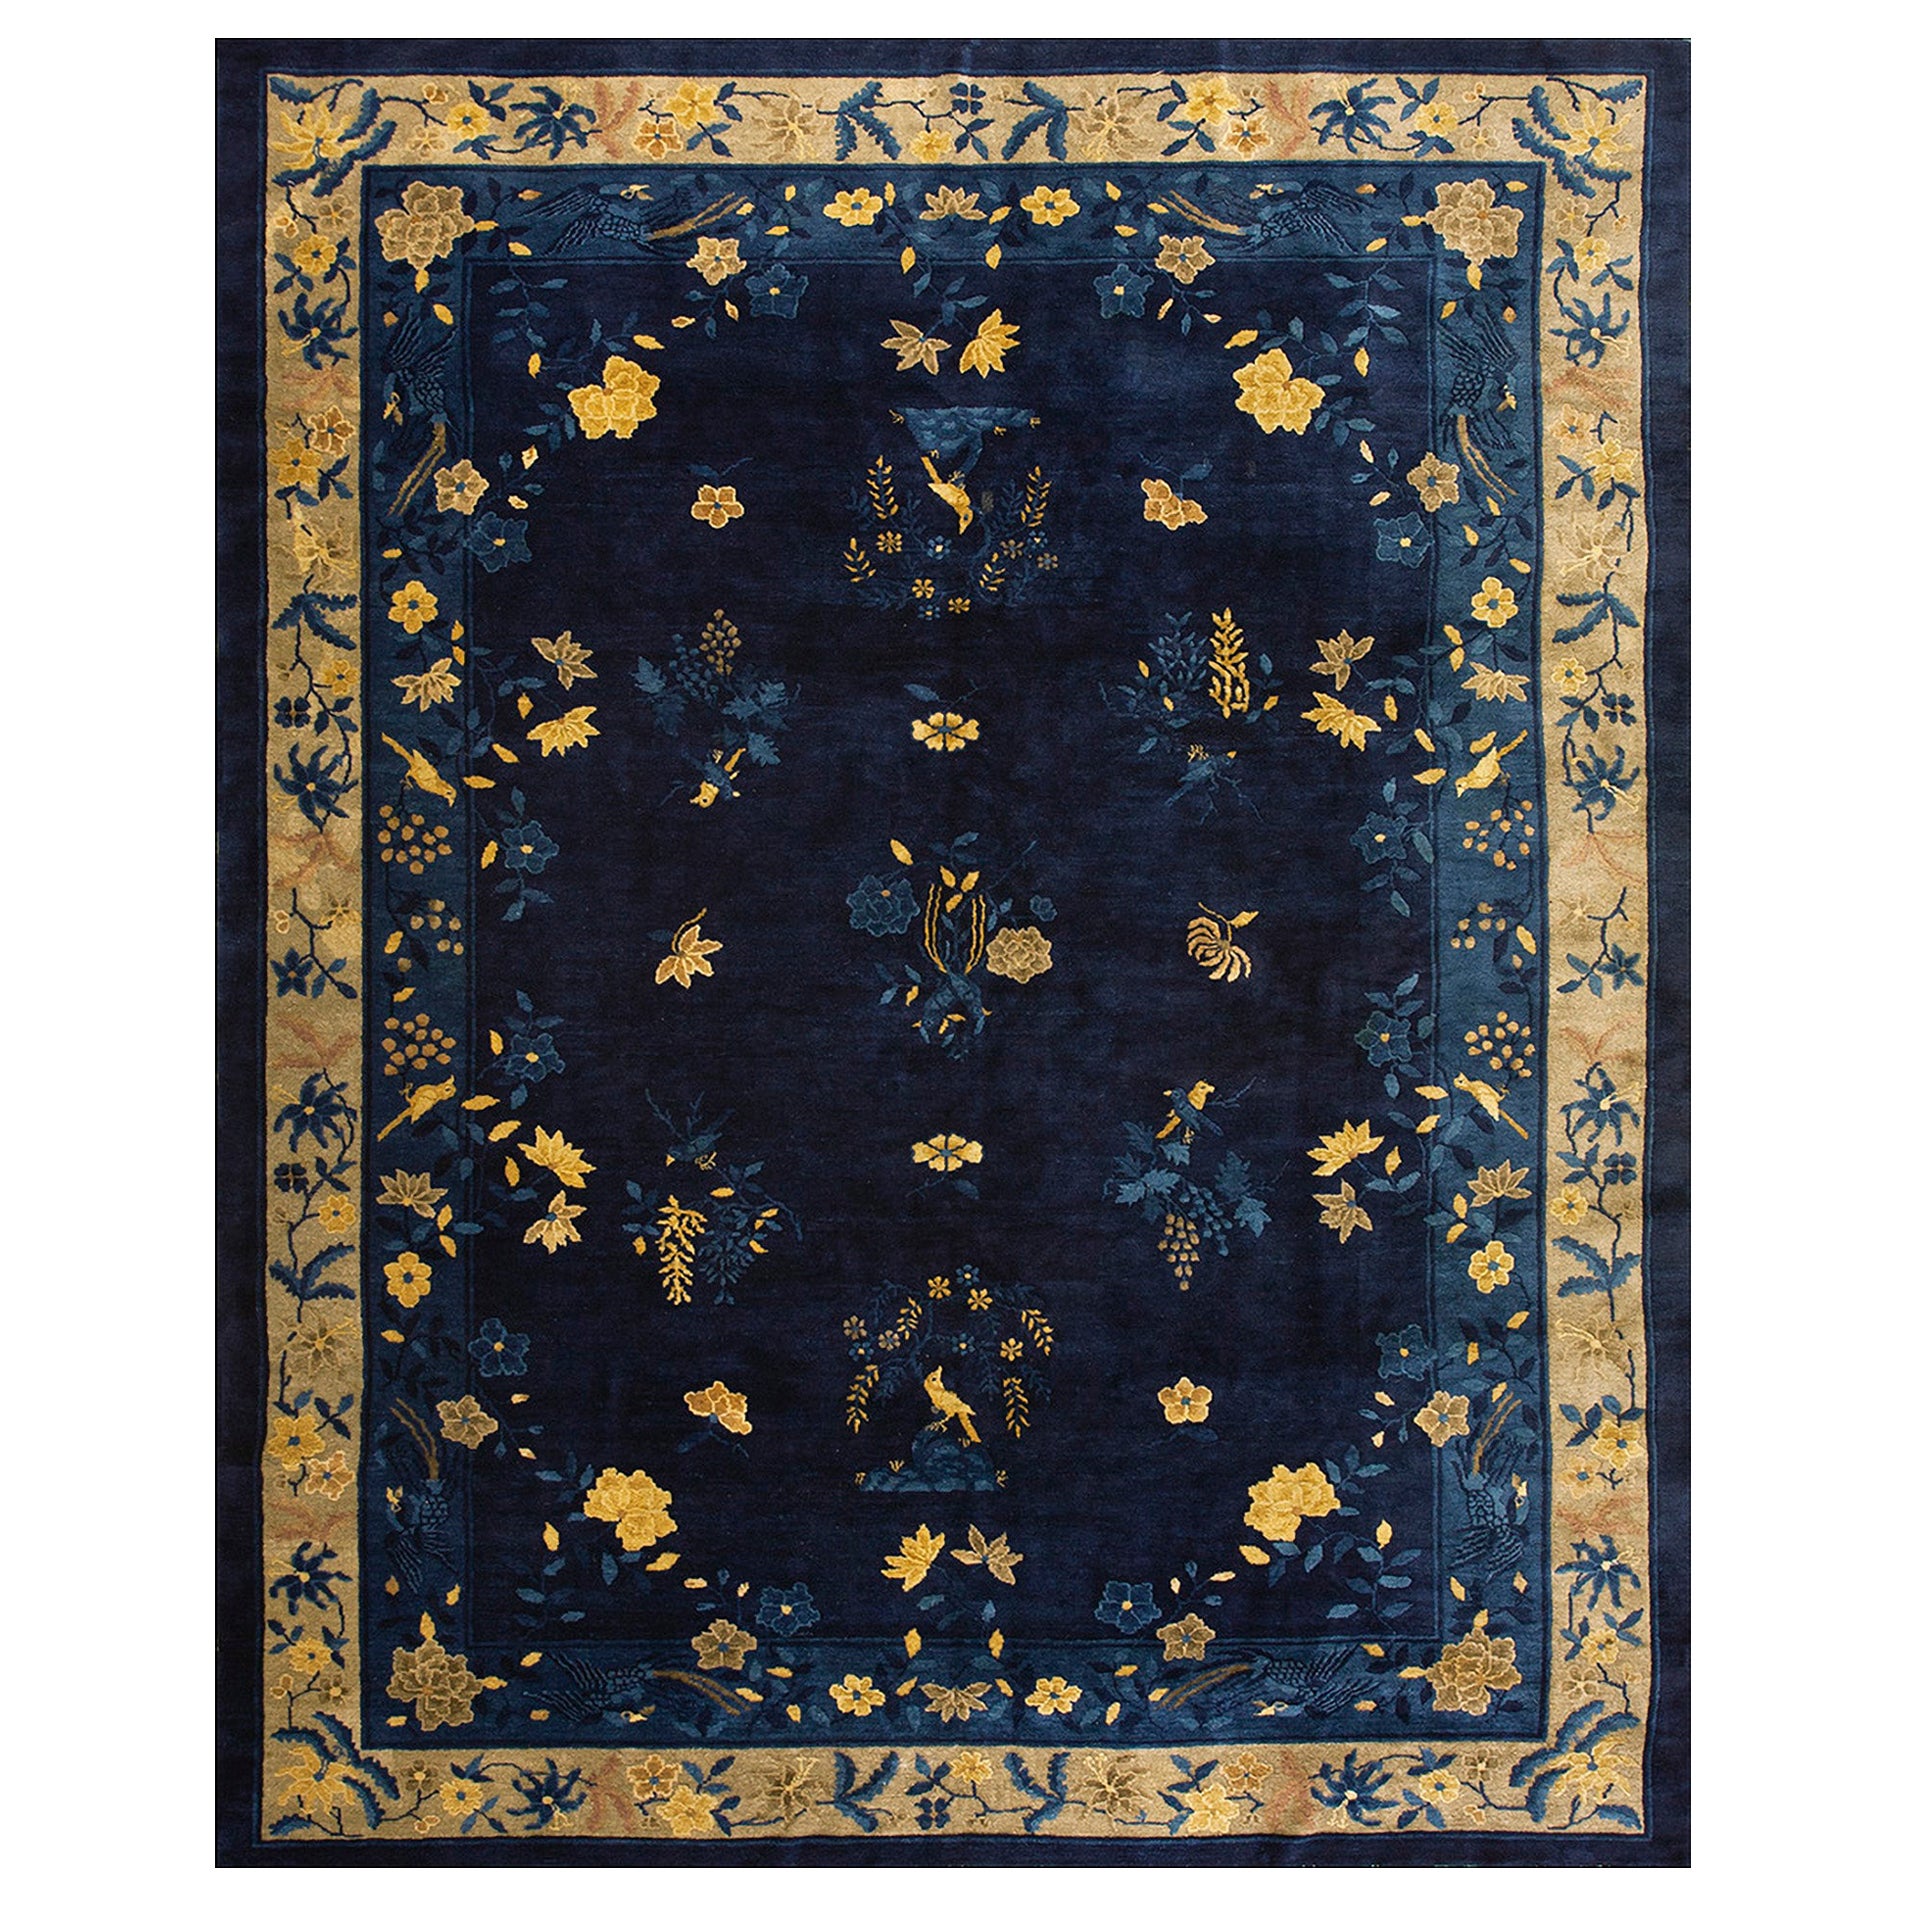 Early 20th Century Chinese Peking Carpet ( 9' x 11'6'' - 275 x 350 )  For Sale